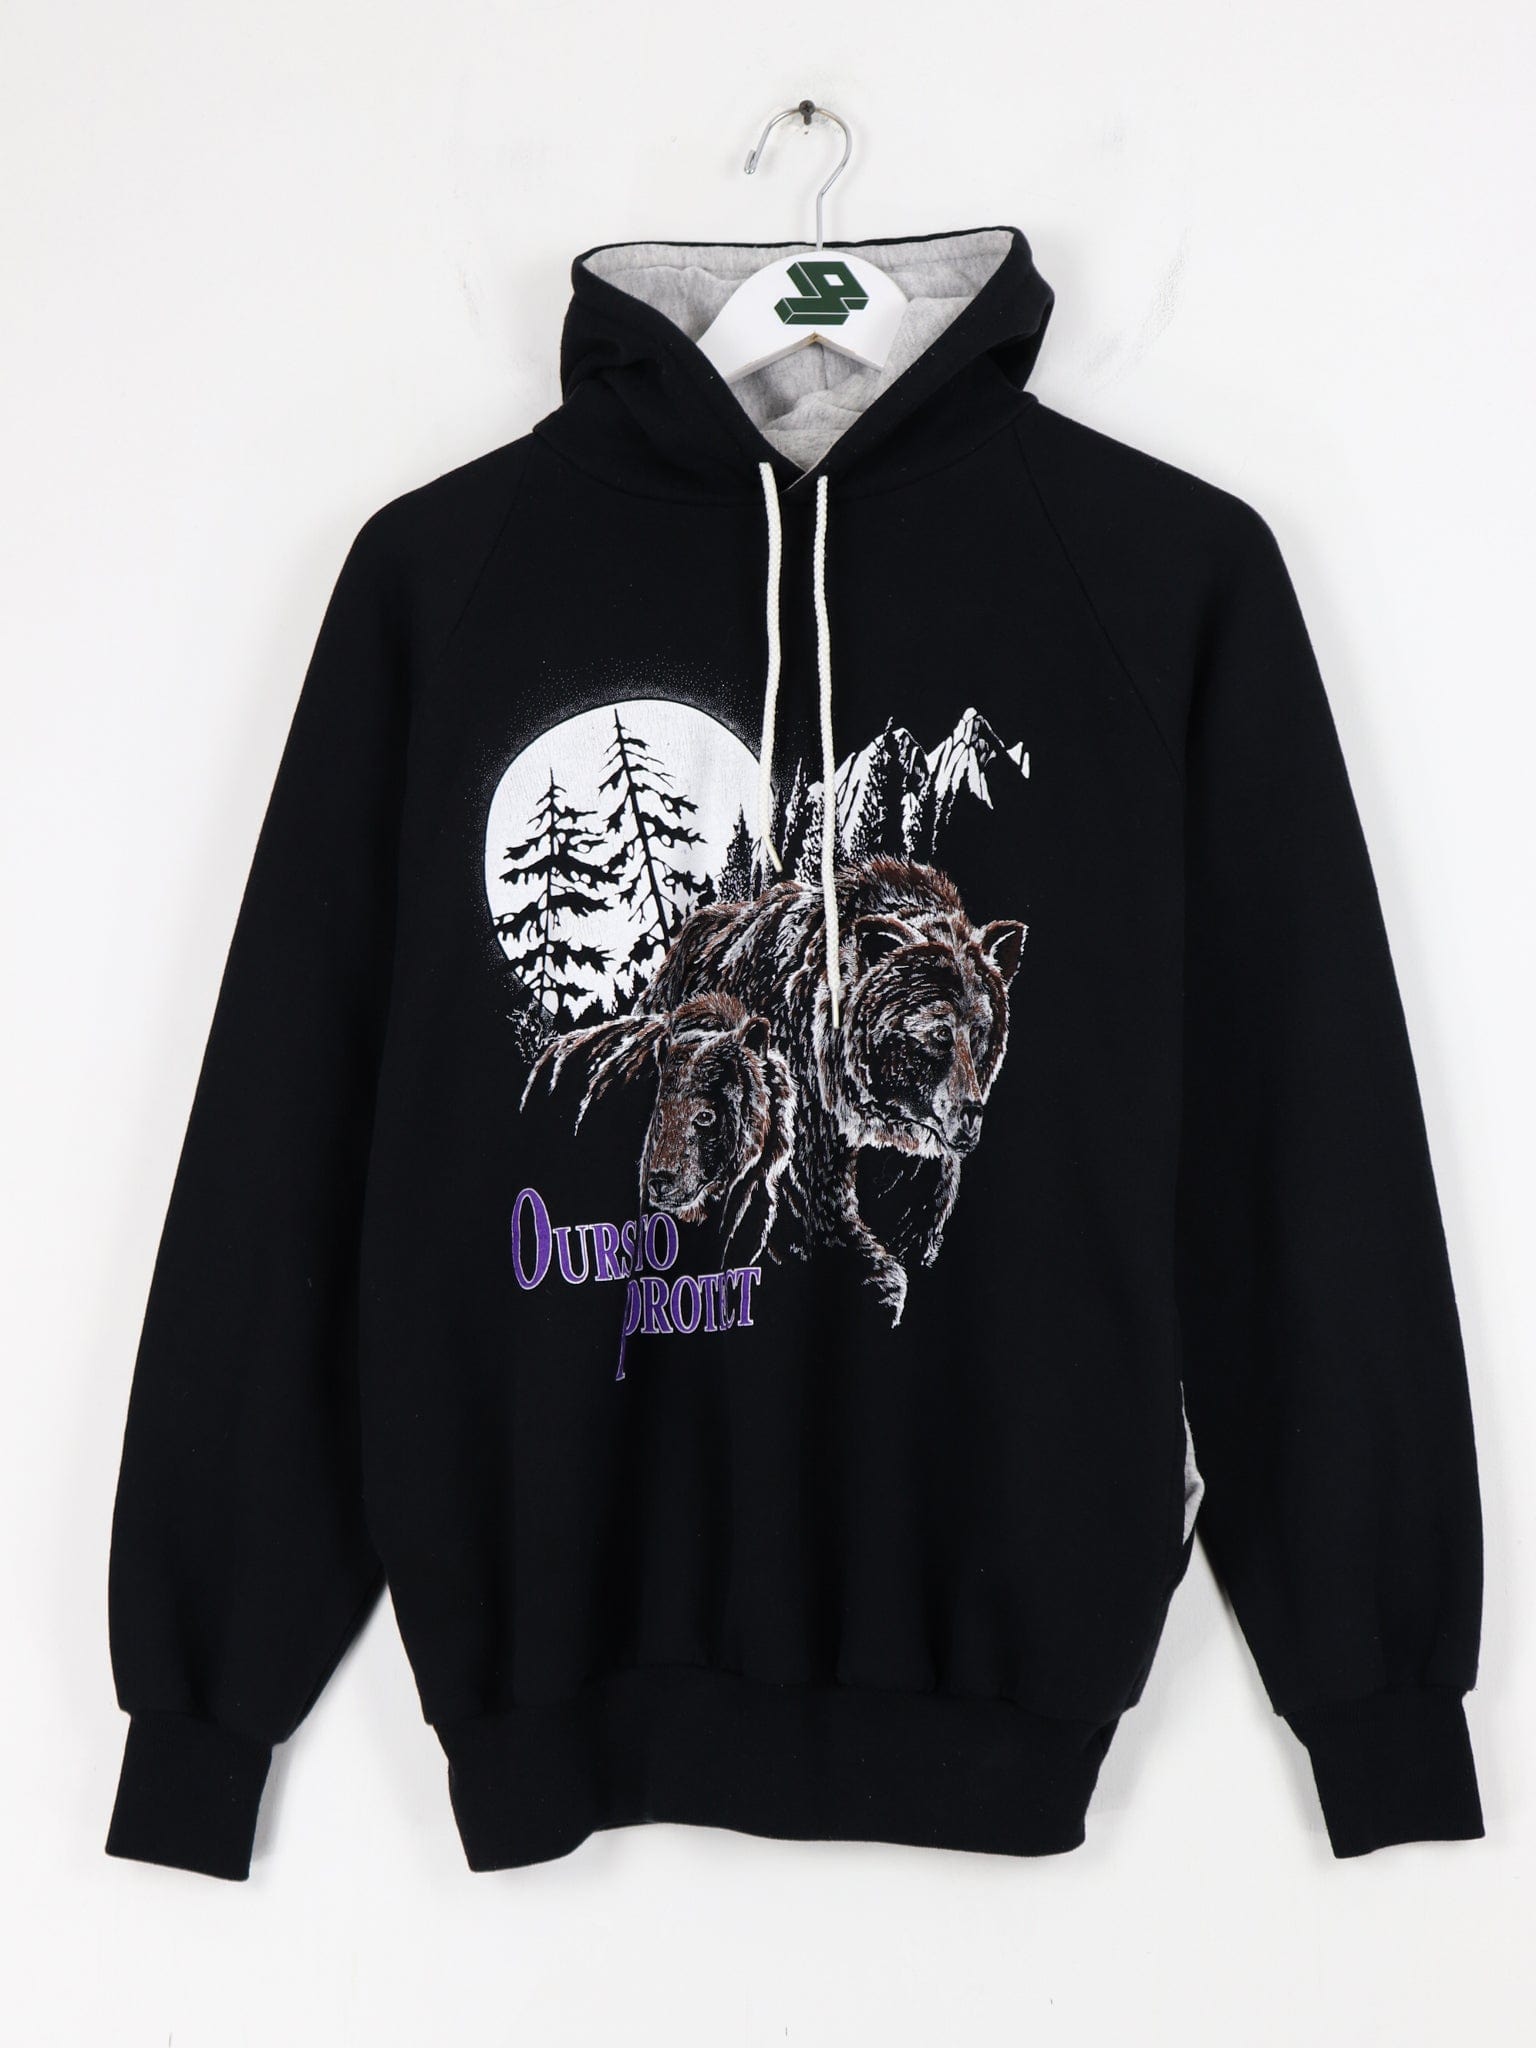 Other Sweatshirts & Hoodies Vintage Ours To Protect Wild Life Hoodie Size Small Fits Like Medium